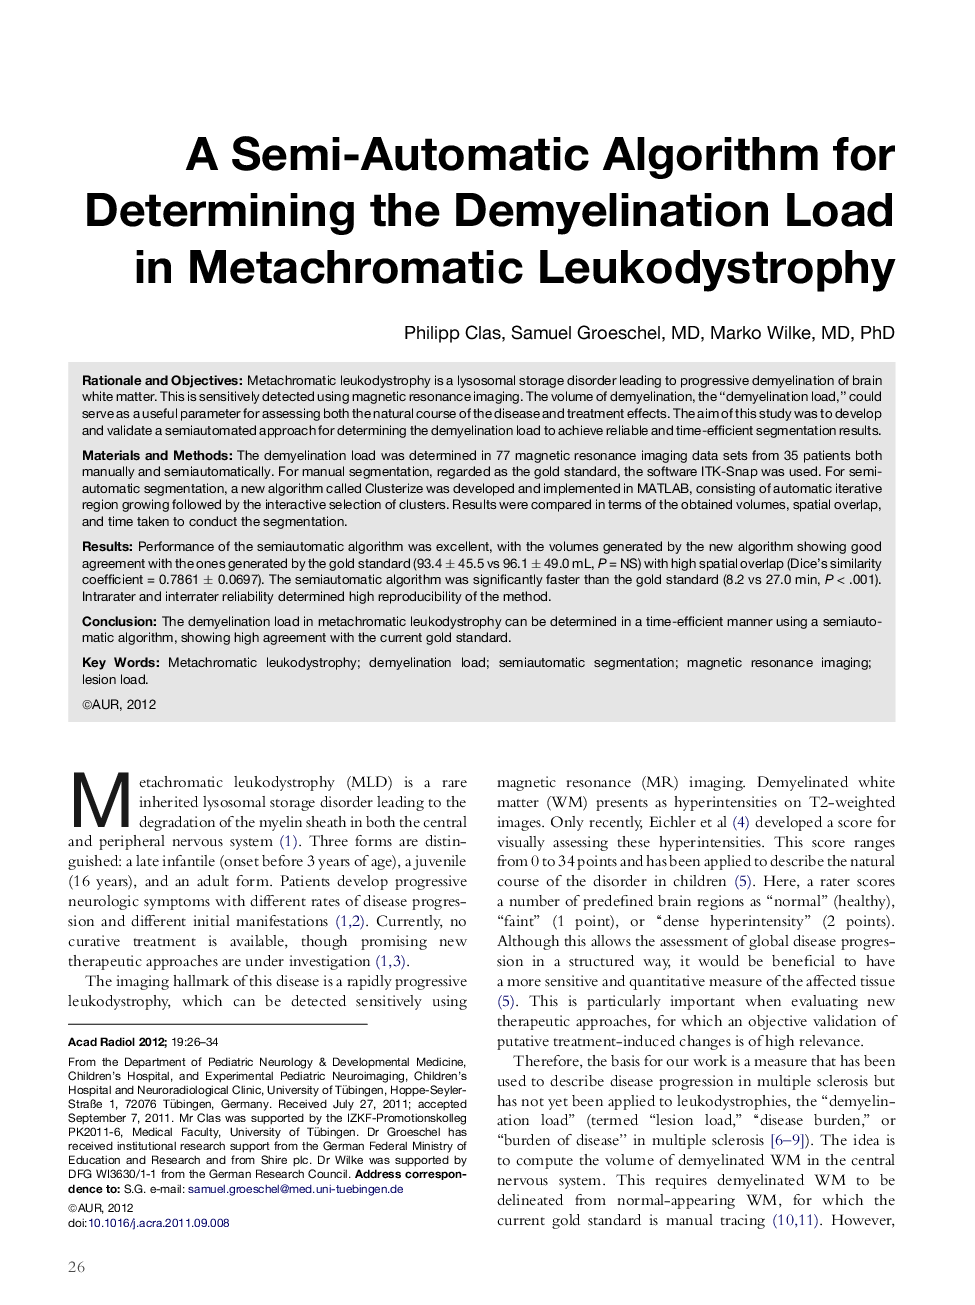 A Semi-Automatic Algorithm for Determining the Demyelination Load in Metachromatic Leukodystrophy